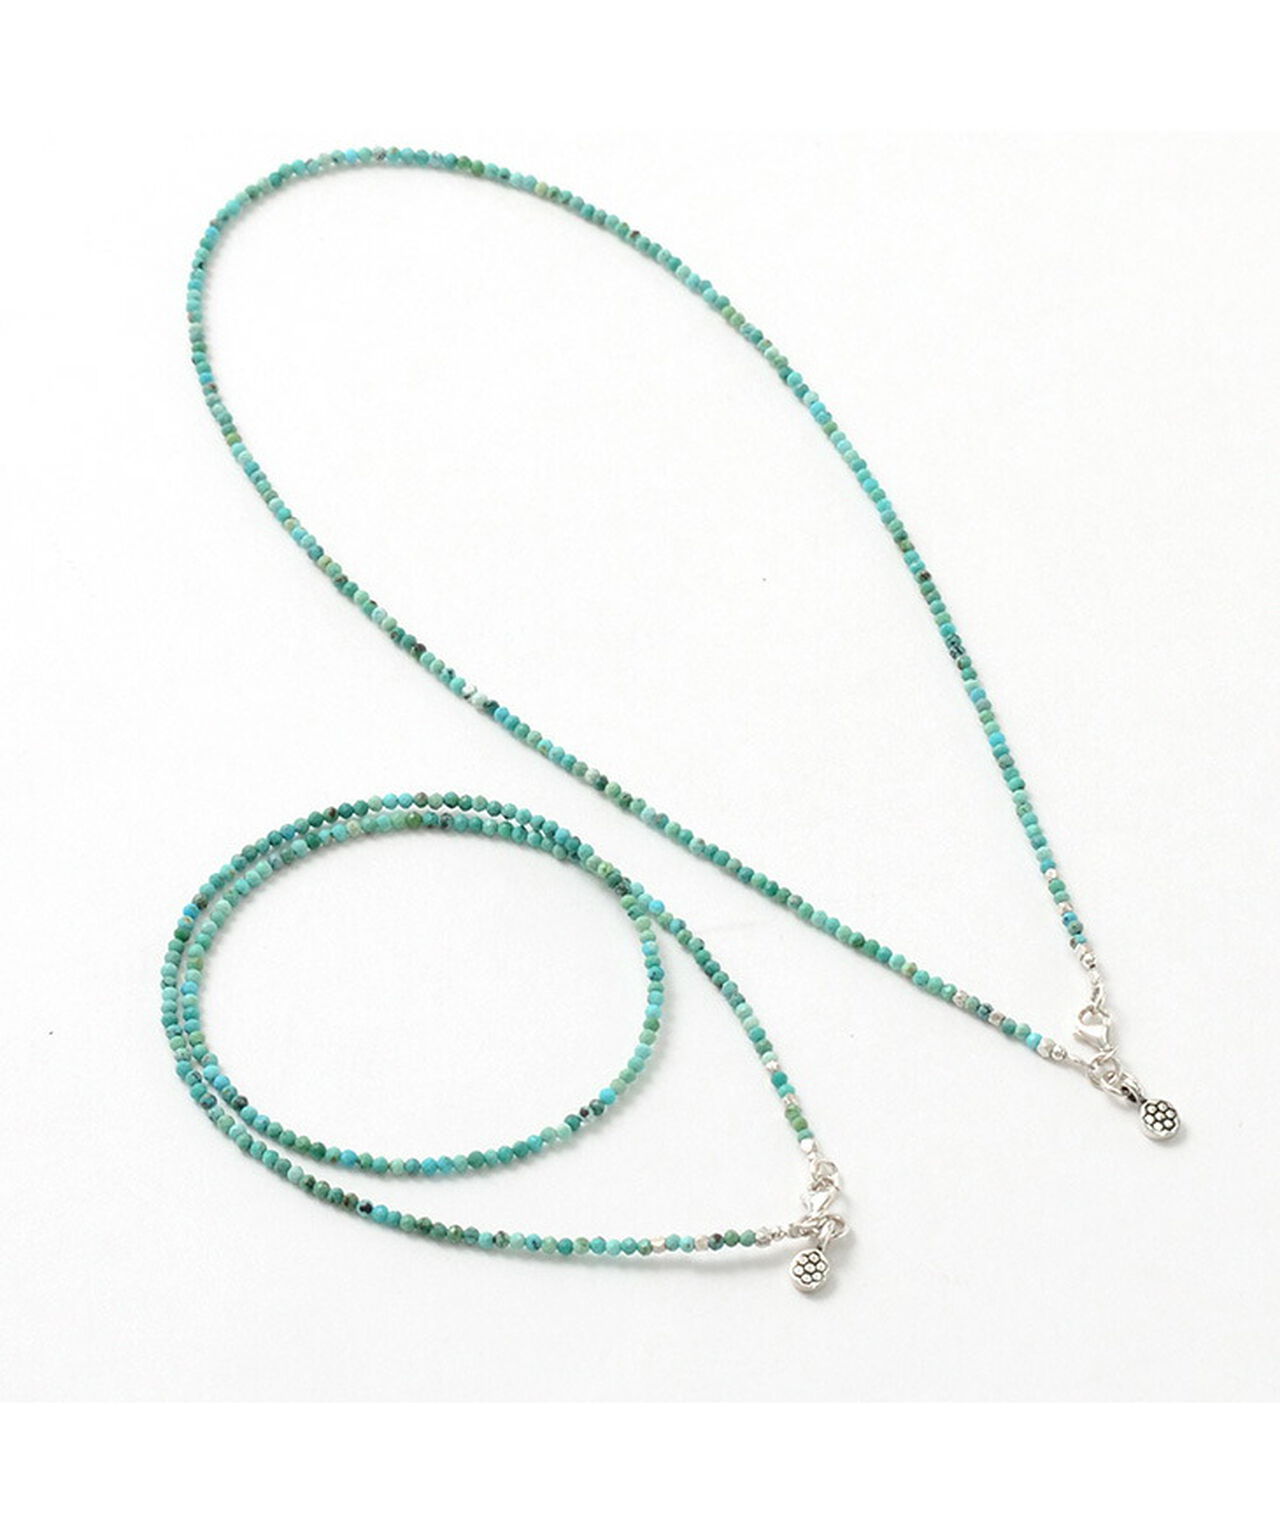 Turquoise 2mm Cut Beads Necklace / Anklet,, large image number 1